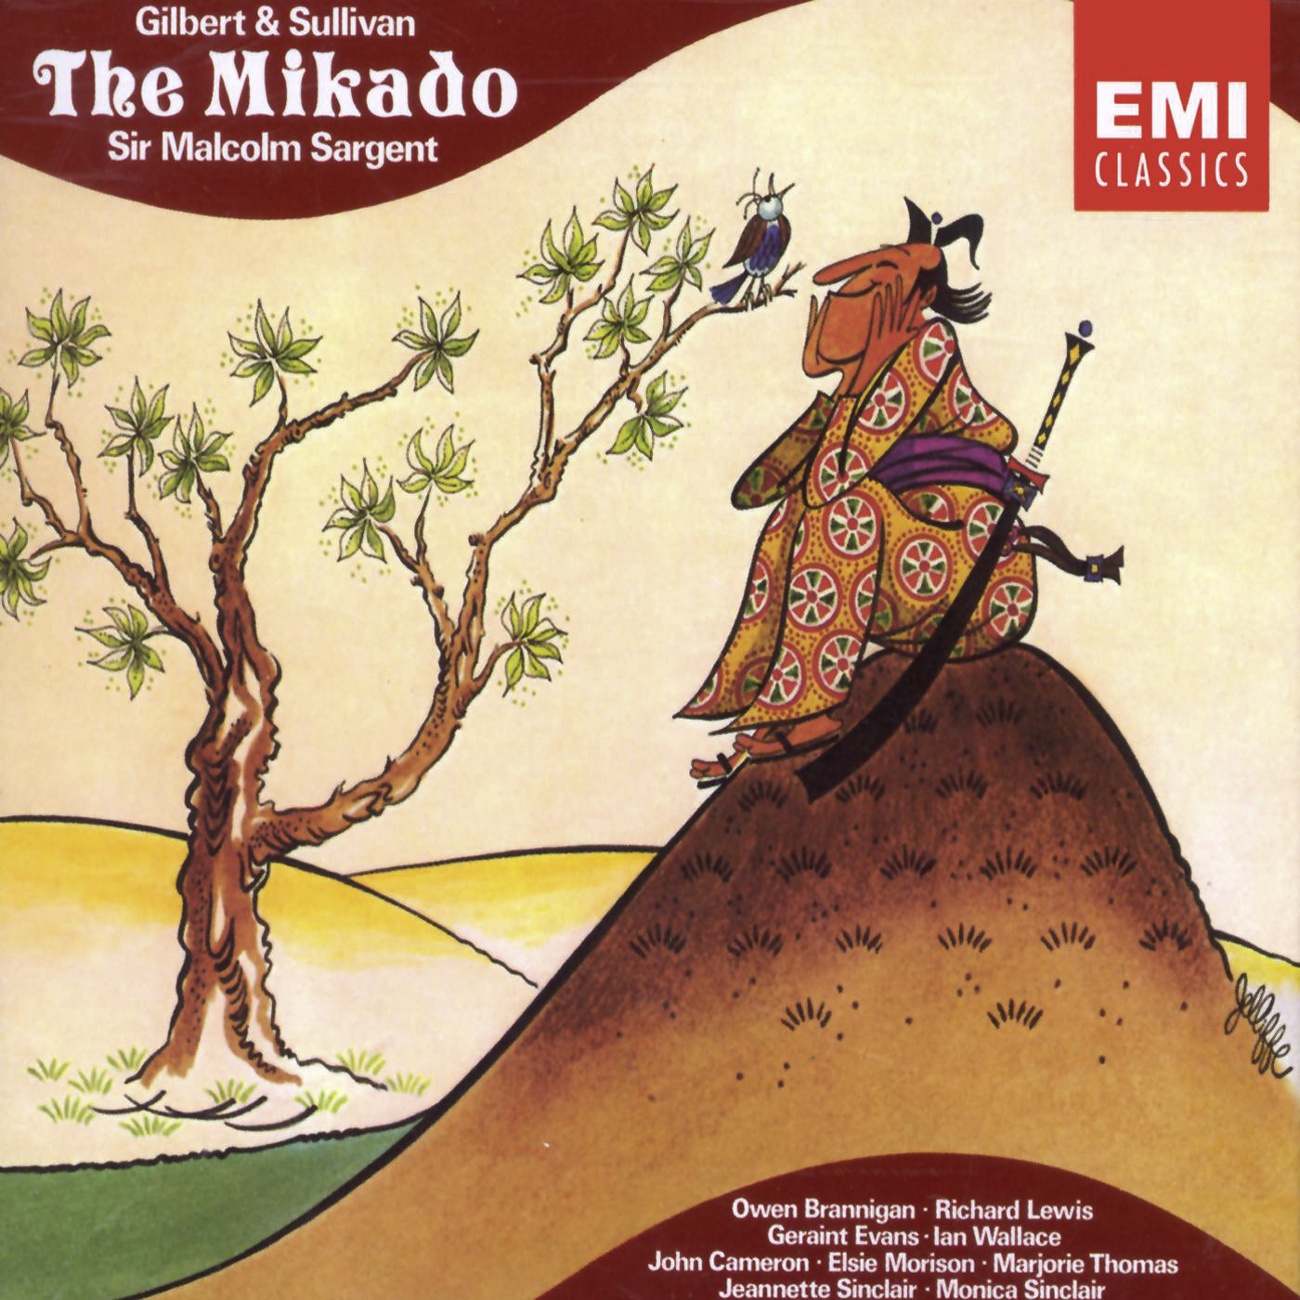 The Mikado (or, The Town of Titipu), Act I: And have I journey'd for a month (Nanki-Poo, Pooh-Bah)